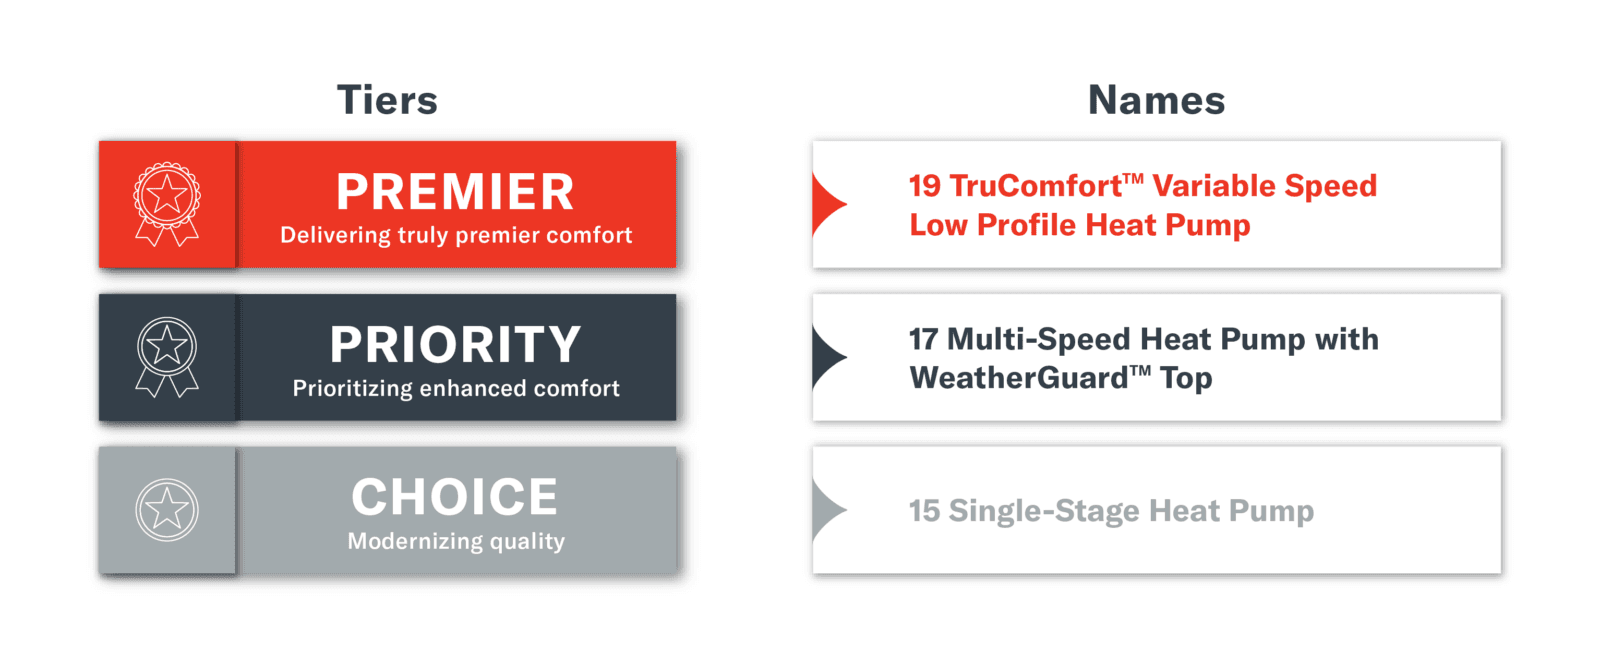 TT Trane New Product Naming Graphic Tiers Names 730x300 022124 1